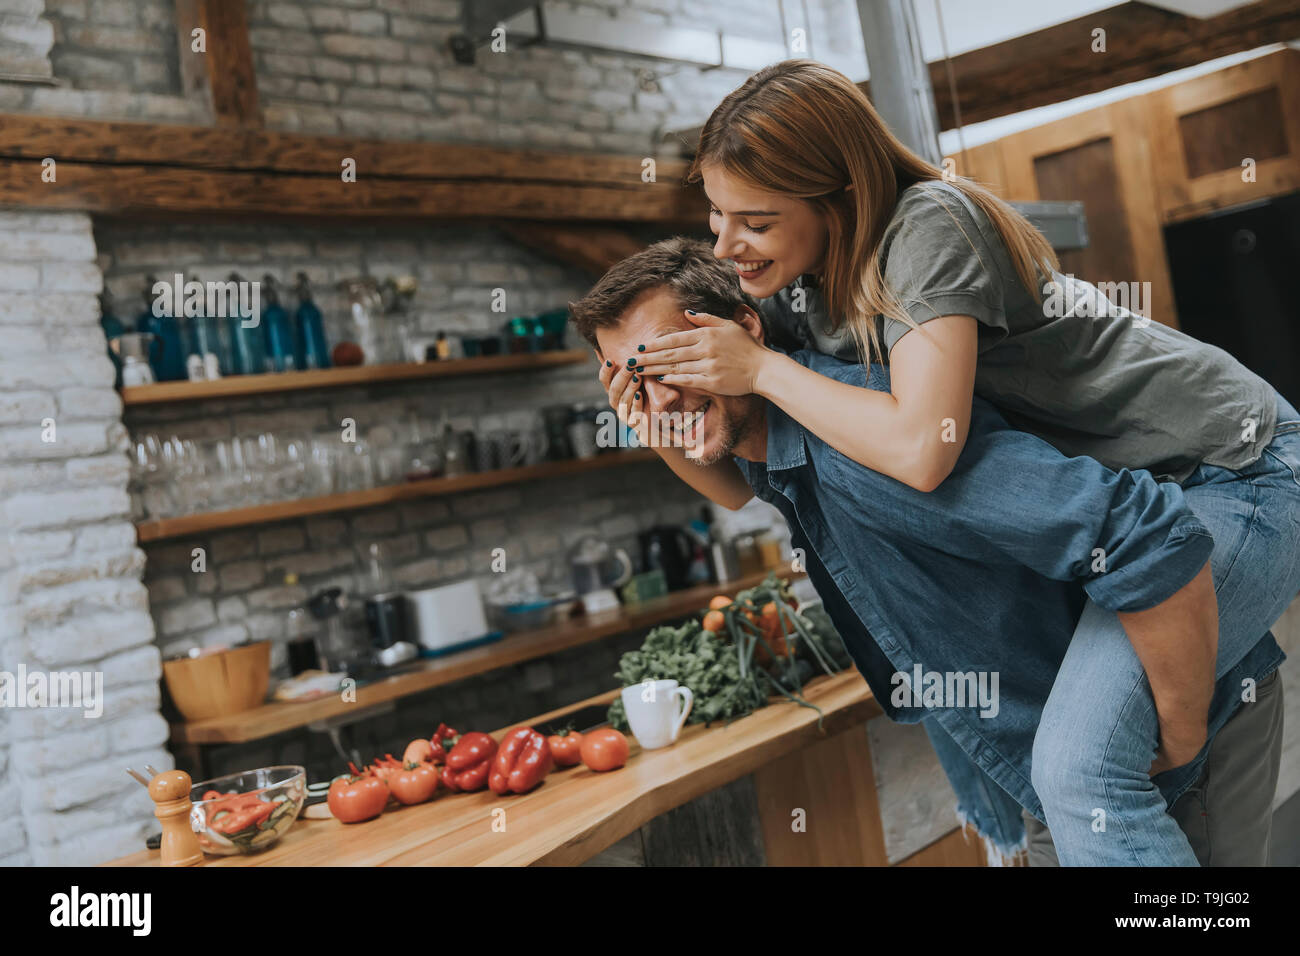 Lovely young couple having fun together at rustic kitchen Stock Photo